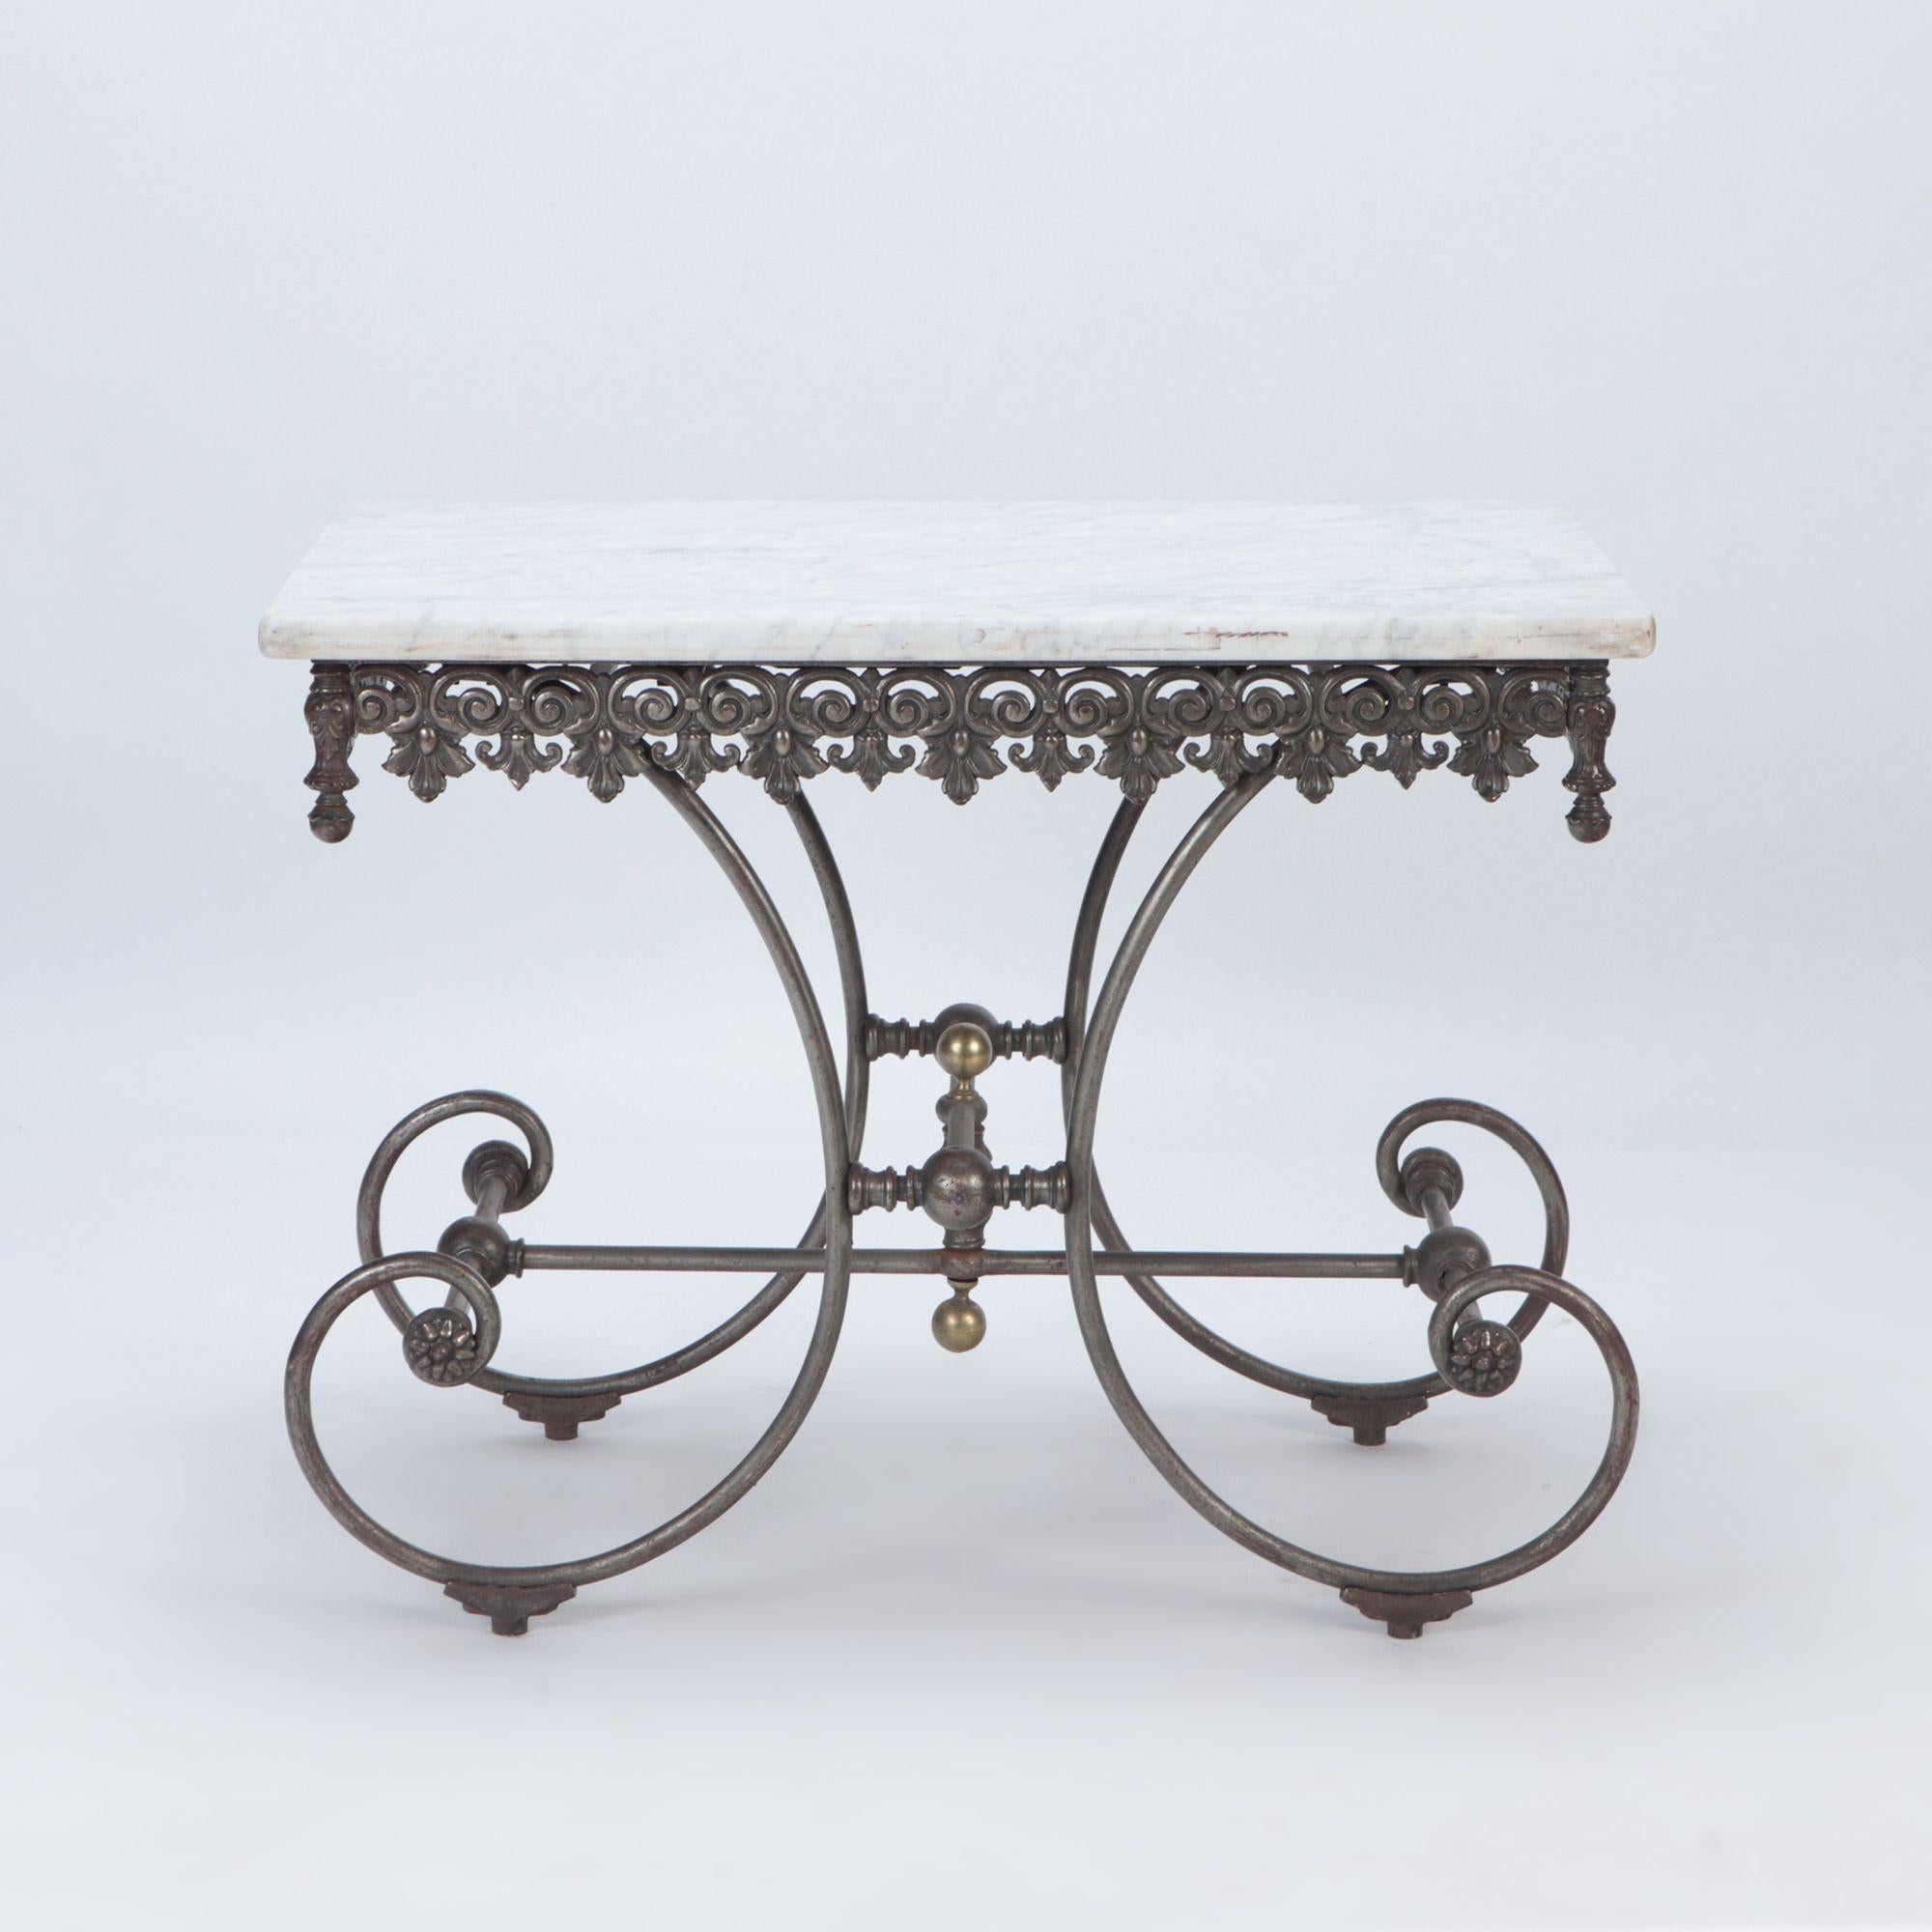 A French vintage cast iron and white marble bakers table. The table features a decorative Fleur de Lis motif and is branded by maker in top rail. Paris, late 19th C. Part of motif missing in the back.